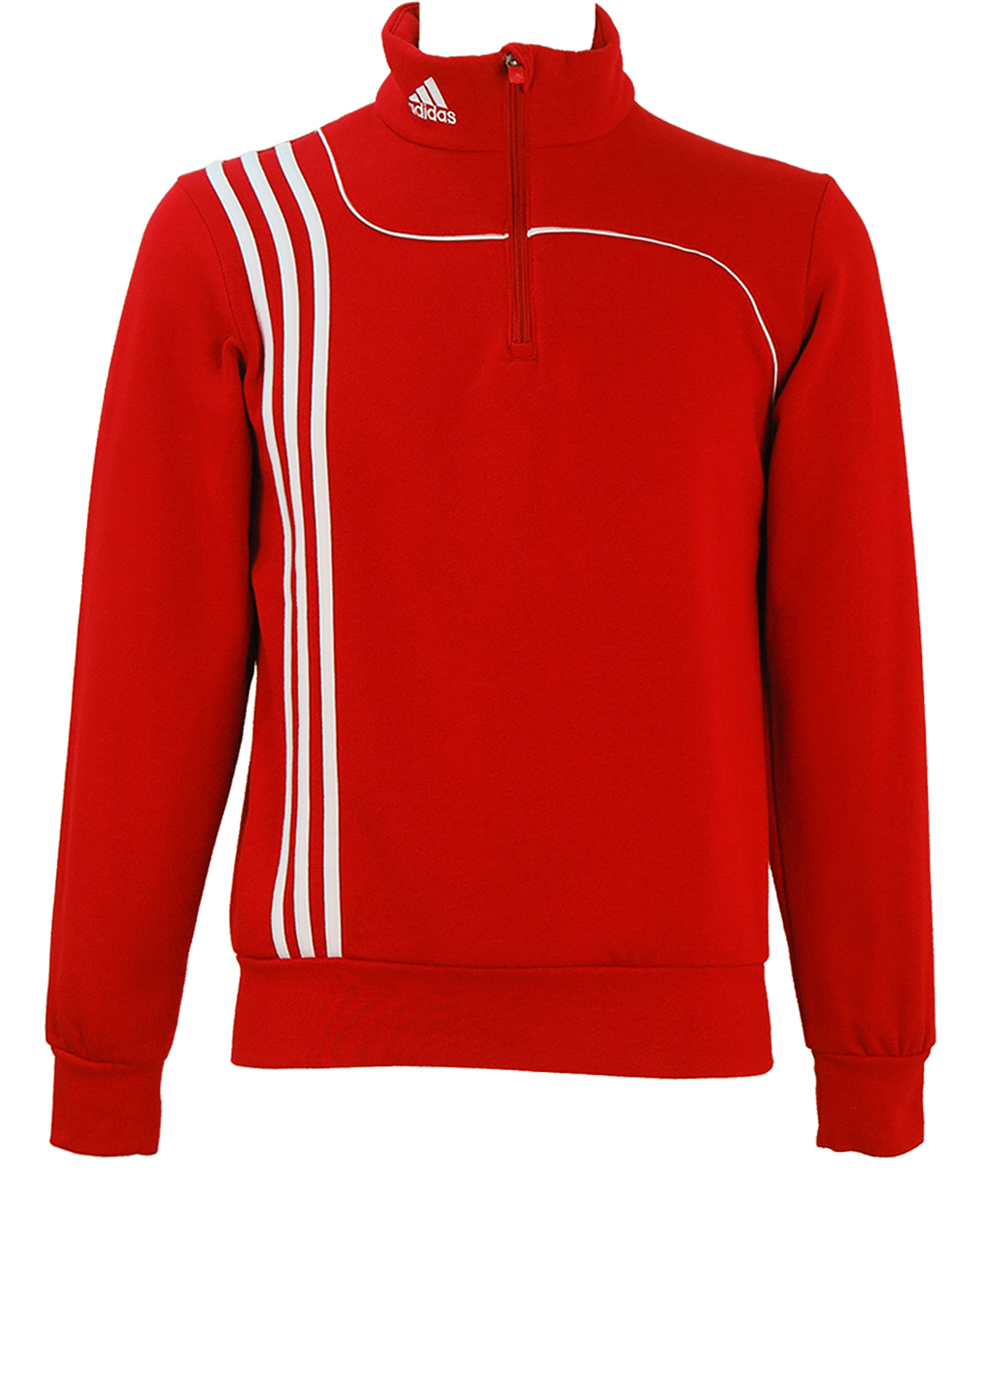 Adidas Red and White Half Zip Track Top - S | Reign Vintage